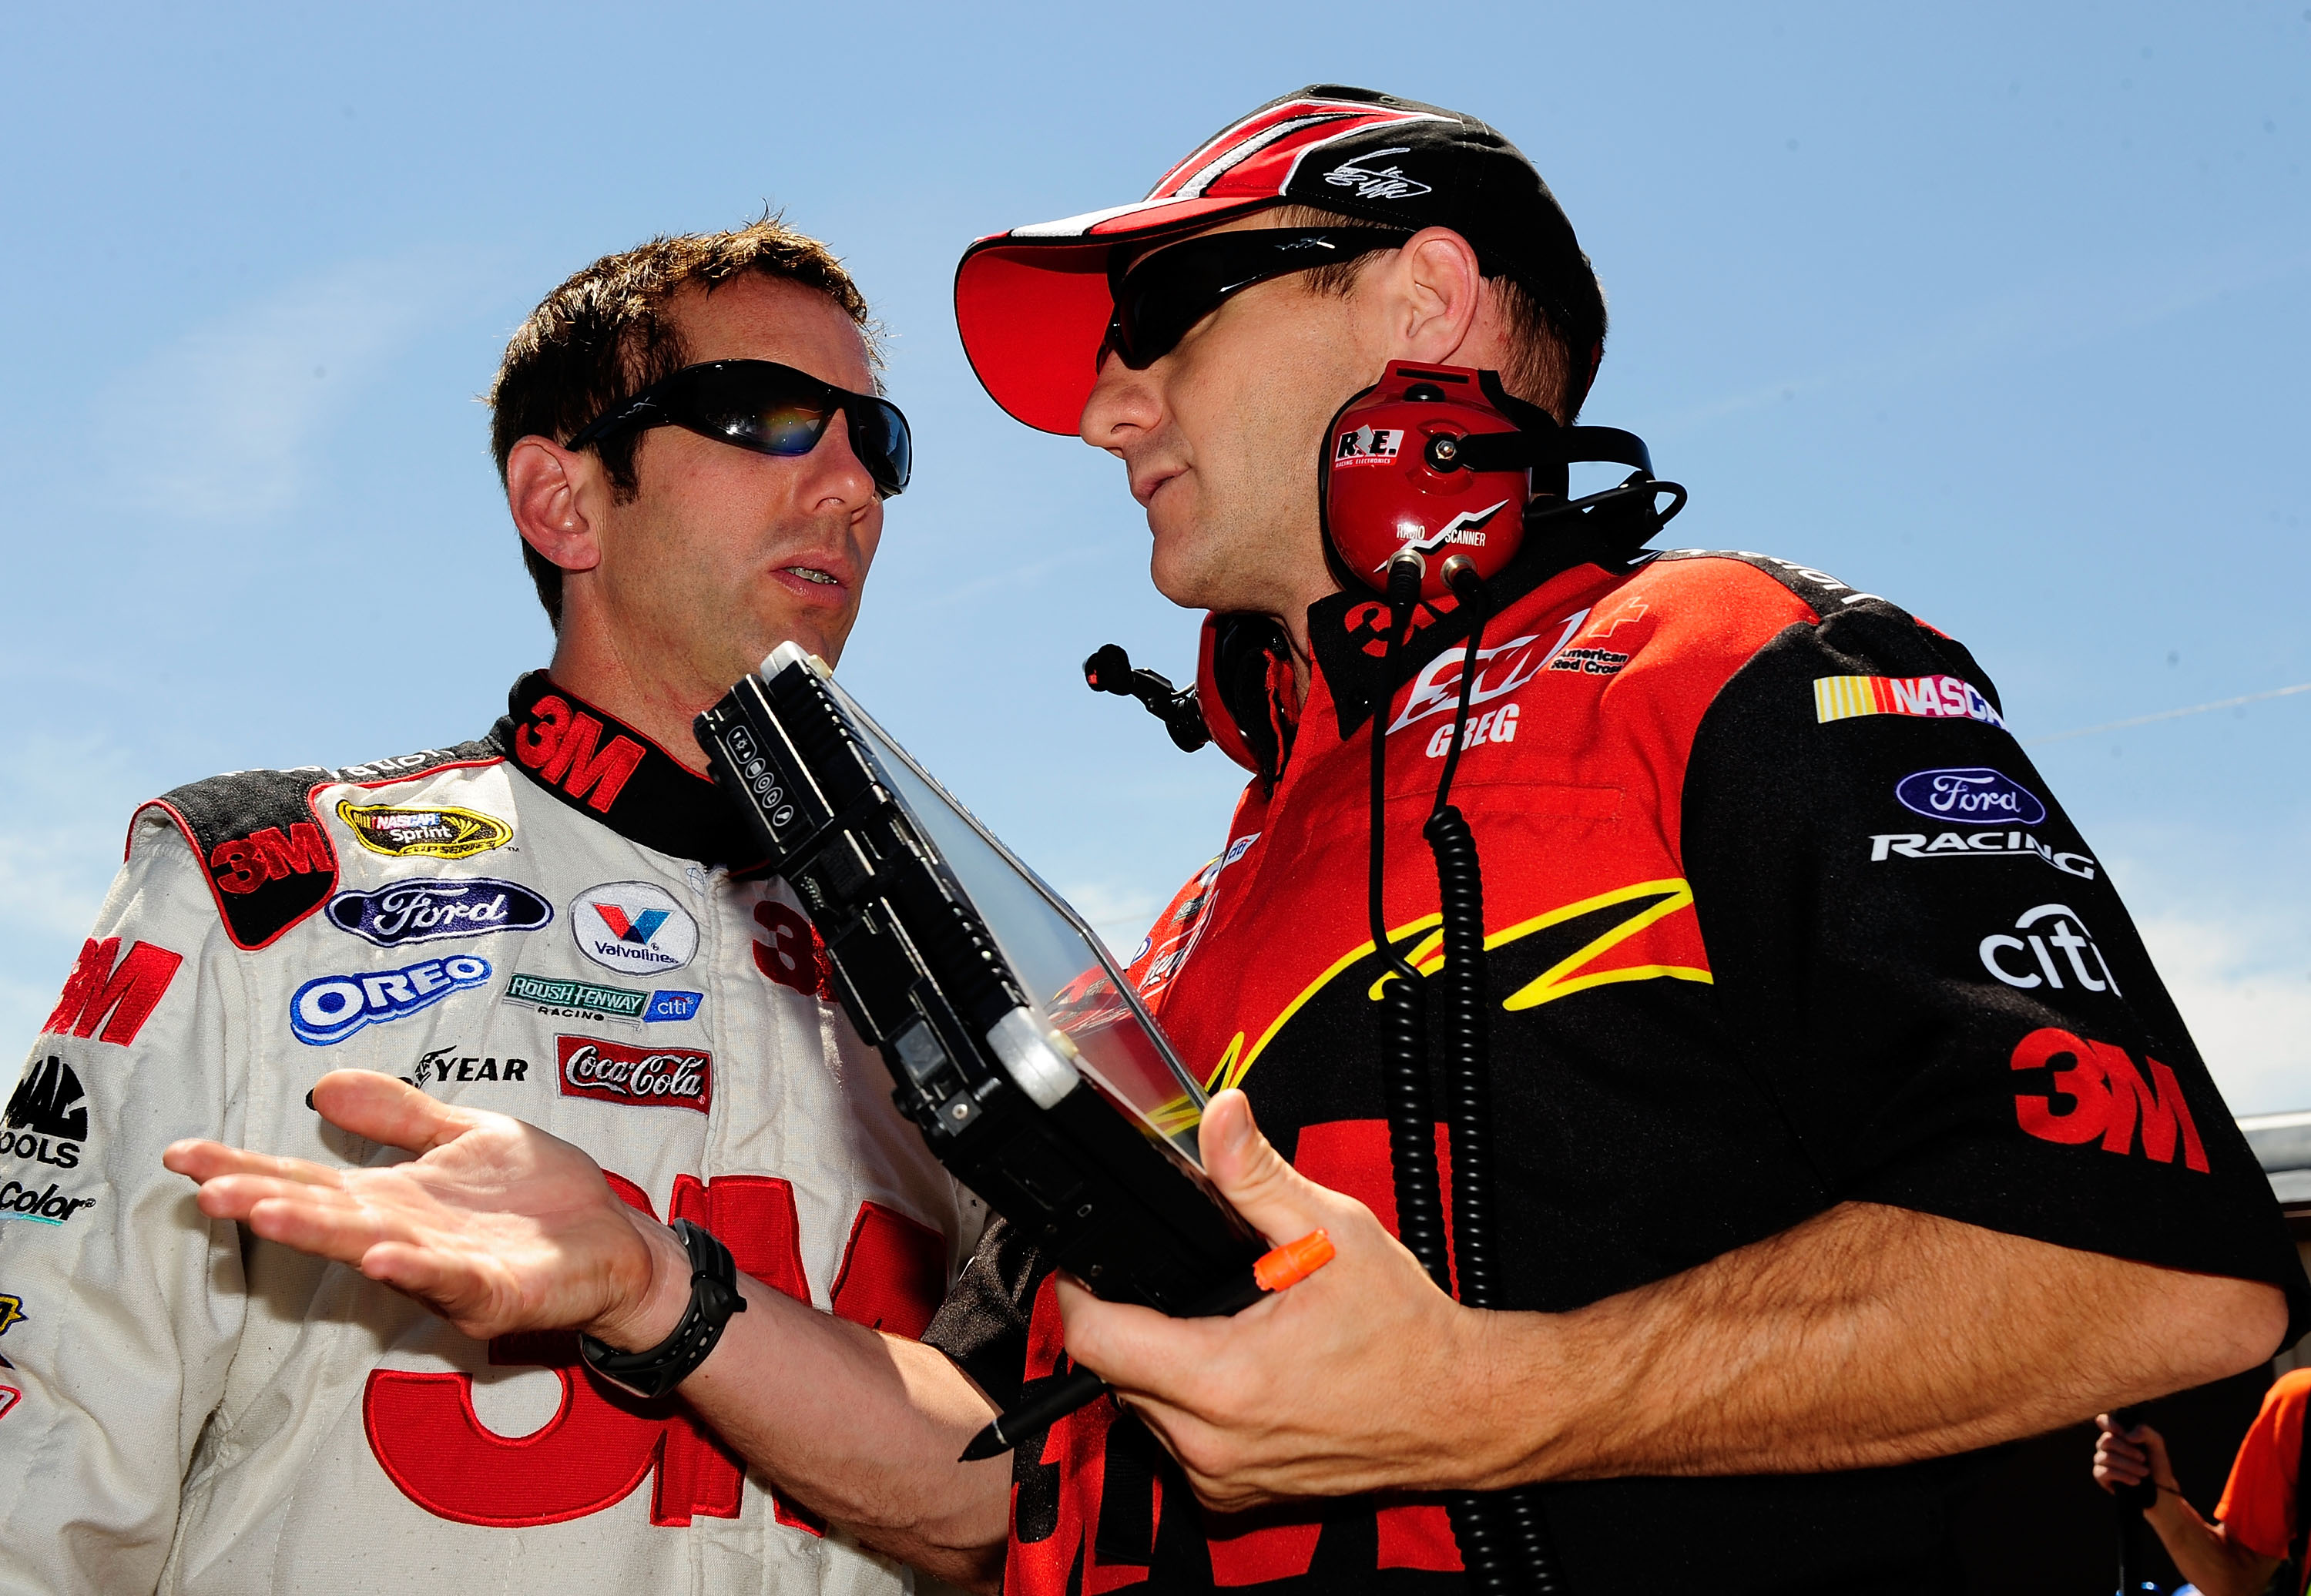 BROOKLYN, MI - JUNE 12:  Greg Biffle (L), driver of the #16 3M Ford, talks with crew chief Greg Erwin (R) during practice for the NASCAR Sprint Cup Series LifeLock 400 at Michigan International Speedway on June 12, 2009 in Brooklyn, Michigan.  (Photo by R